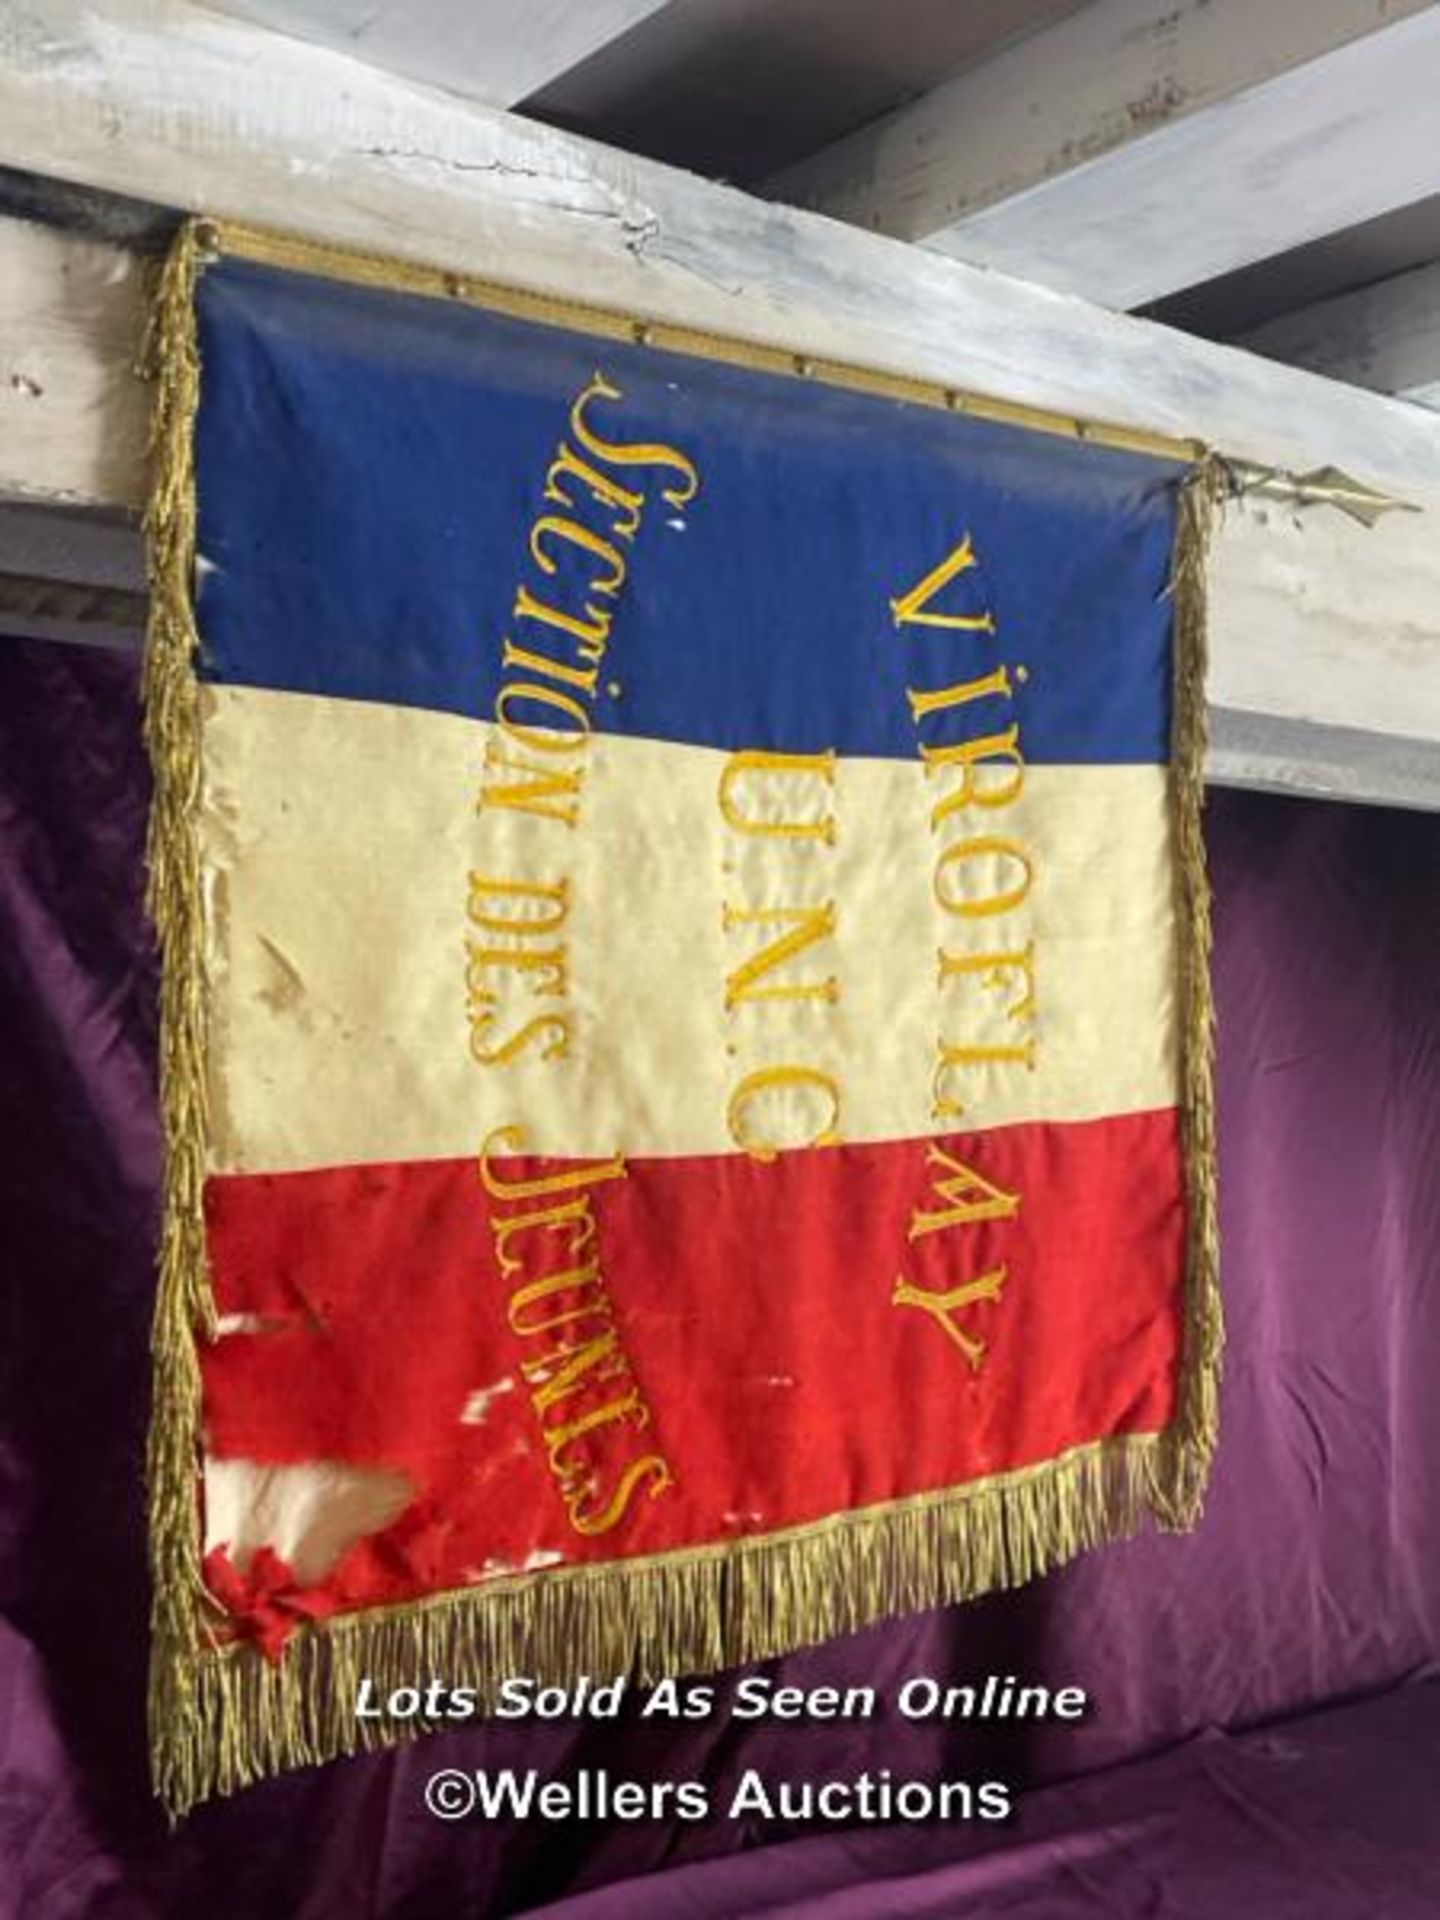 EARLY 20TH CENTURY COMMEMORATIVE FRENCH FLAG, VIROFLAY U.N.C. SECTION DES JEUNES, POLE HEIGHT 108CM,